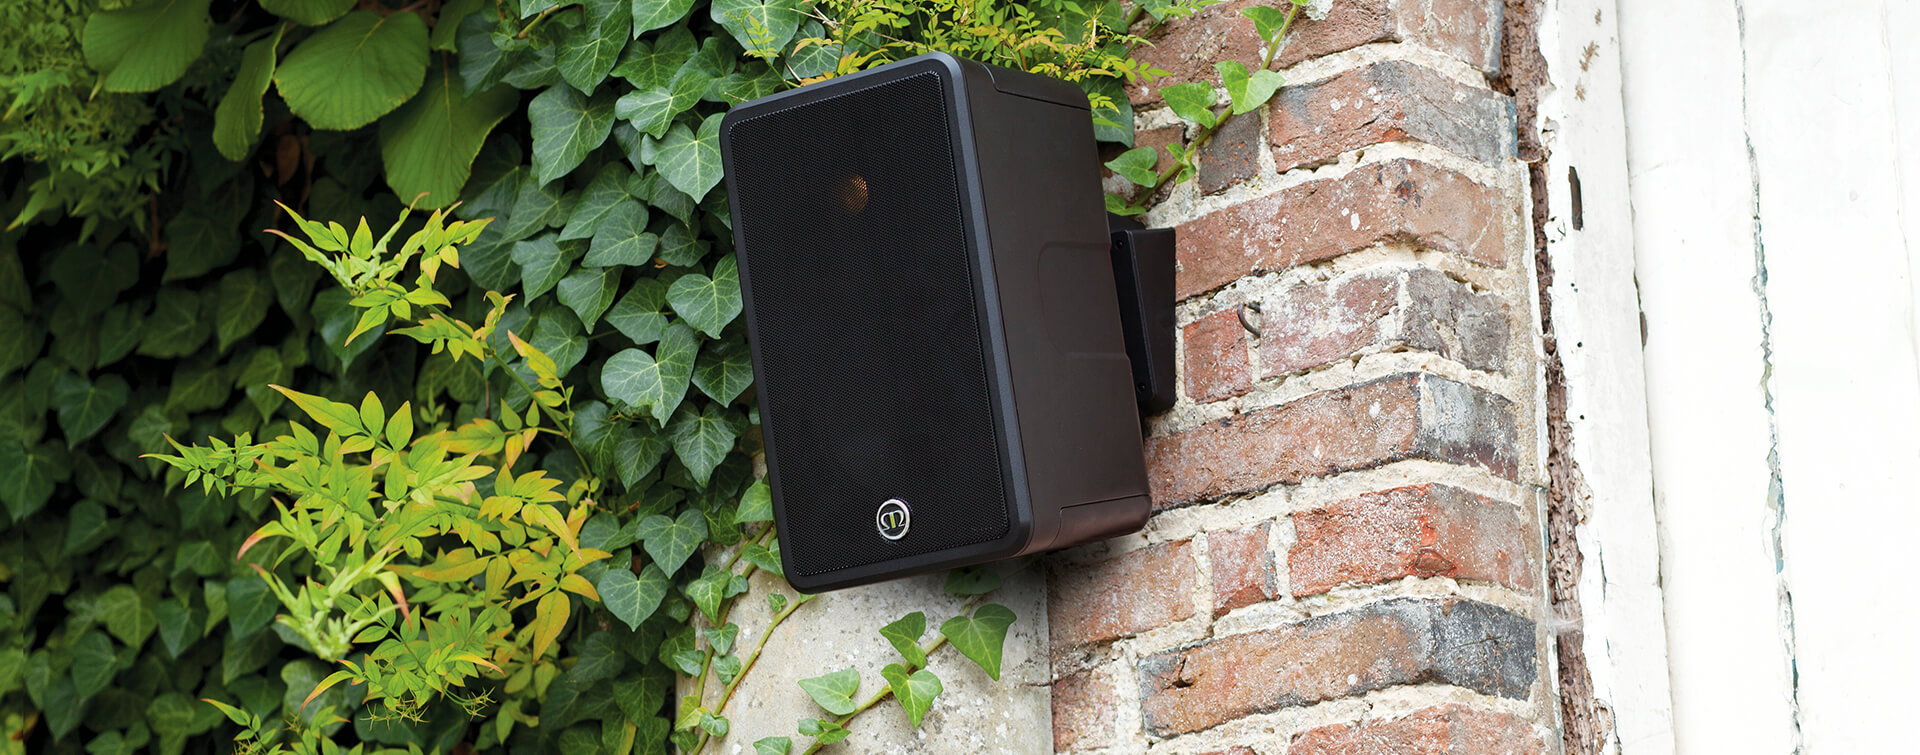 Black Monitor Audio Climate 50 outdoor speaker mounted on brick wall